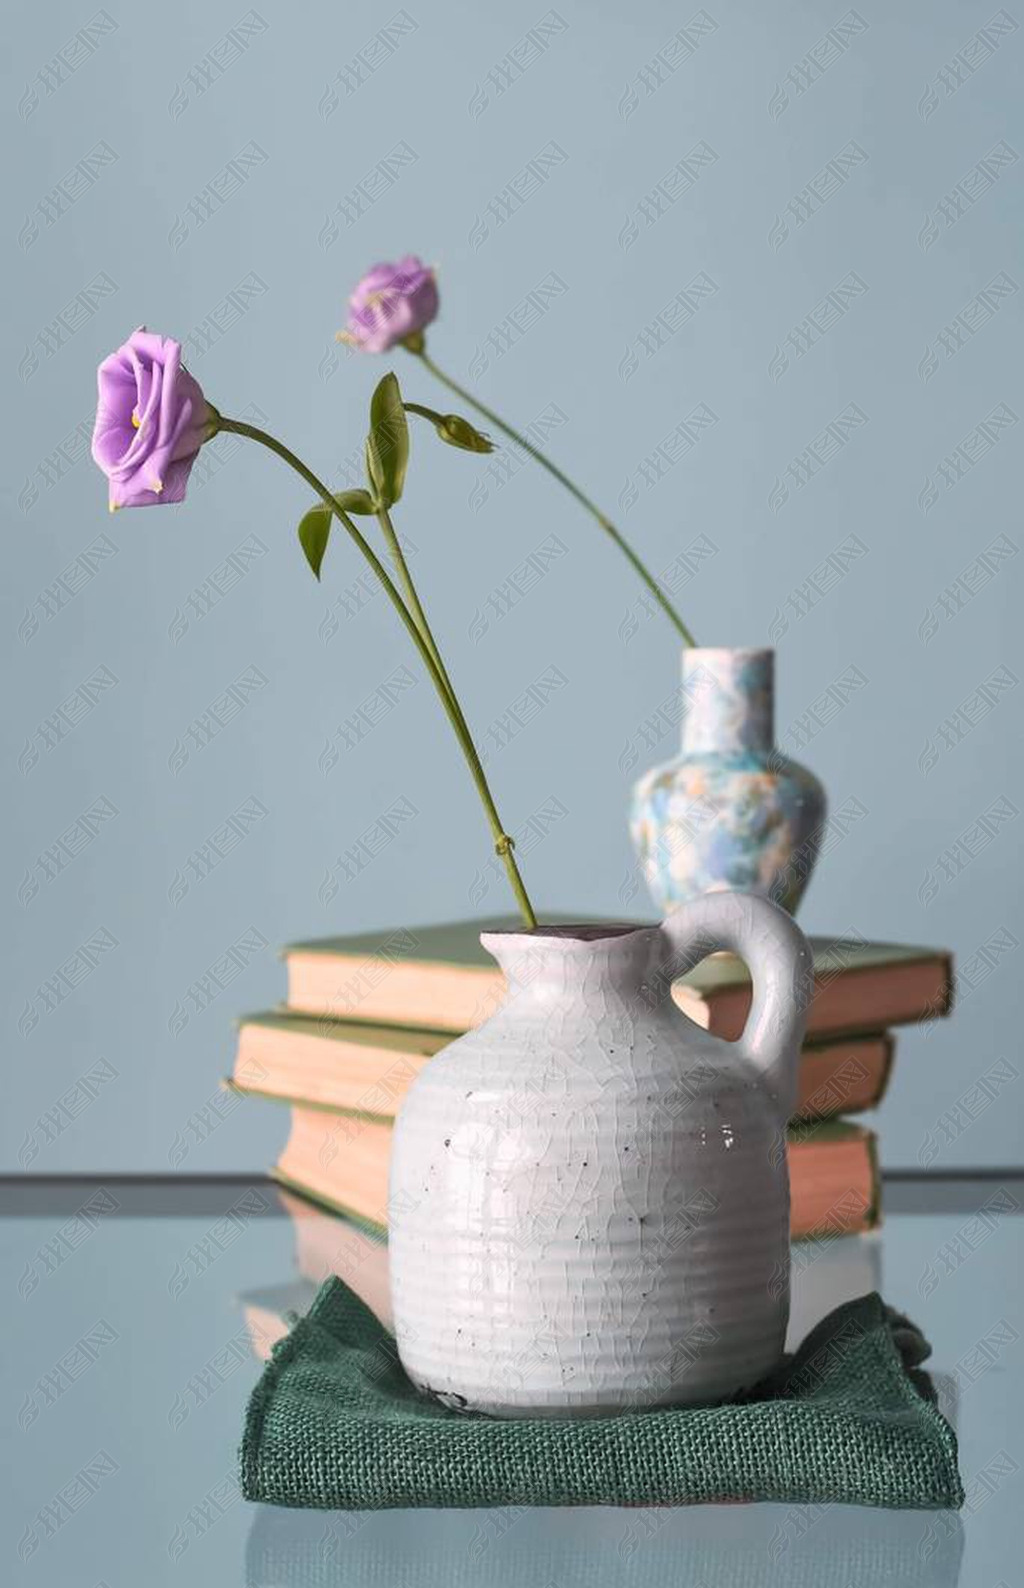 Retro home decor: a stack of books, flower in a vase